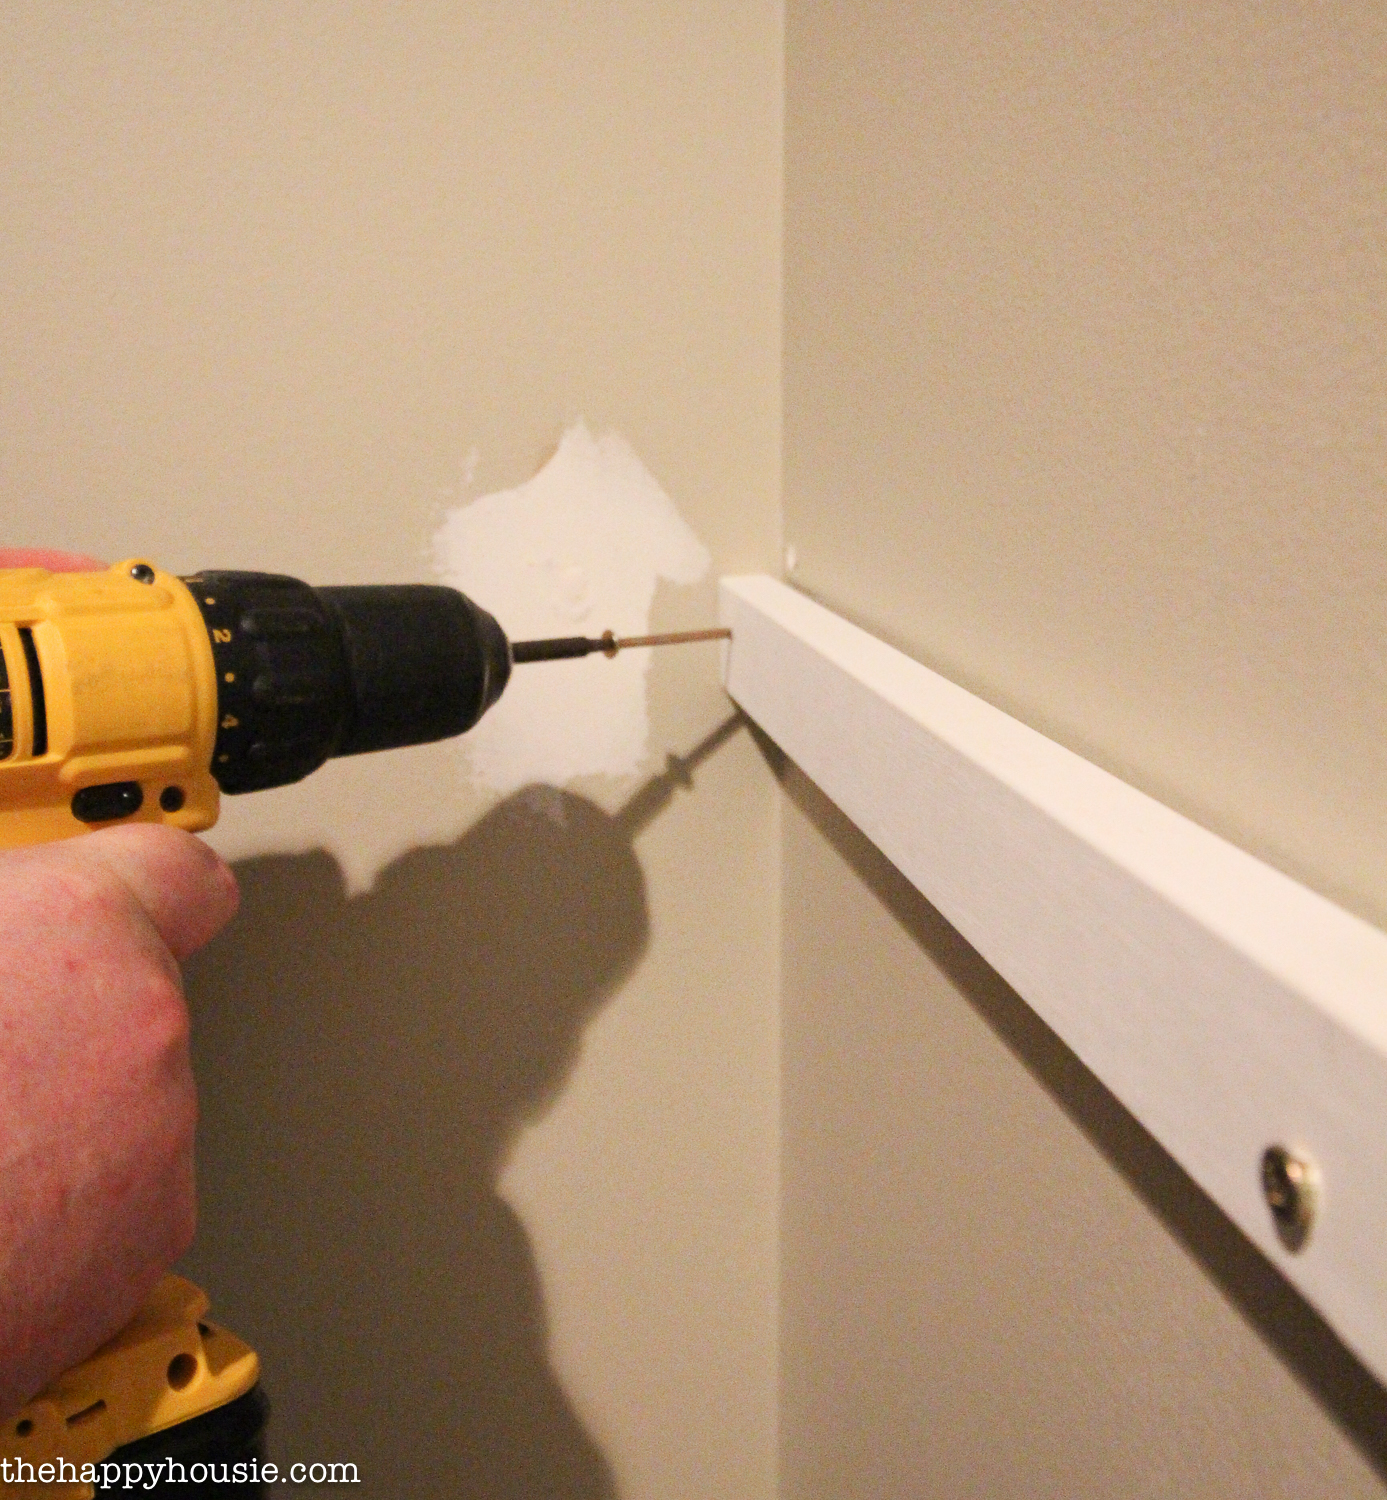 Using the power screwdriver for the shelf.